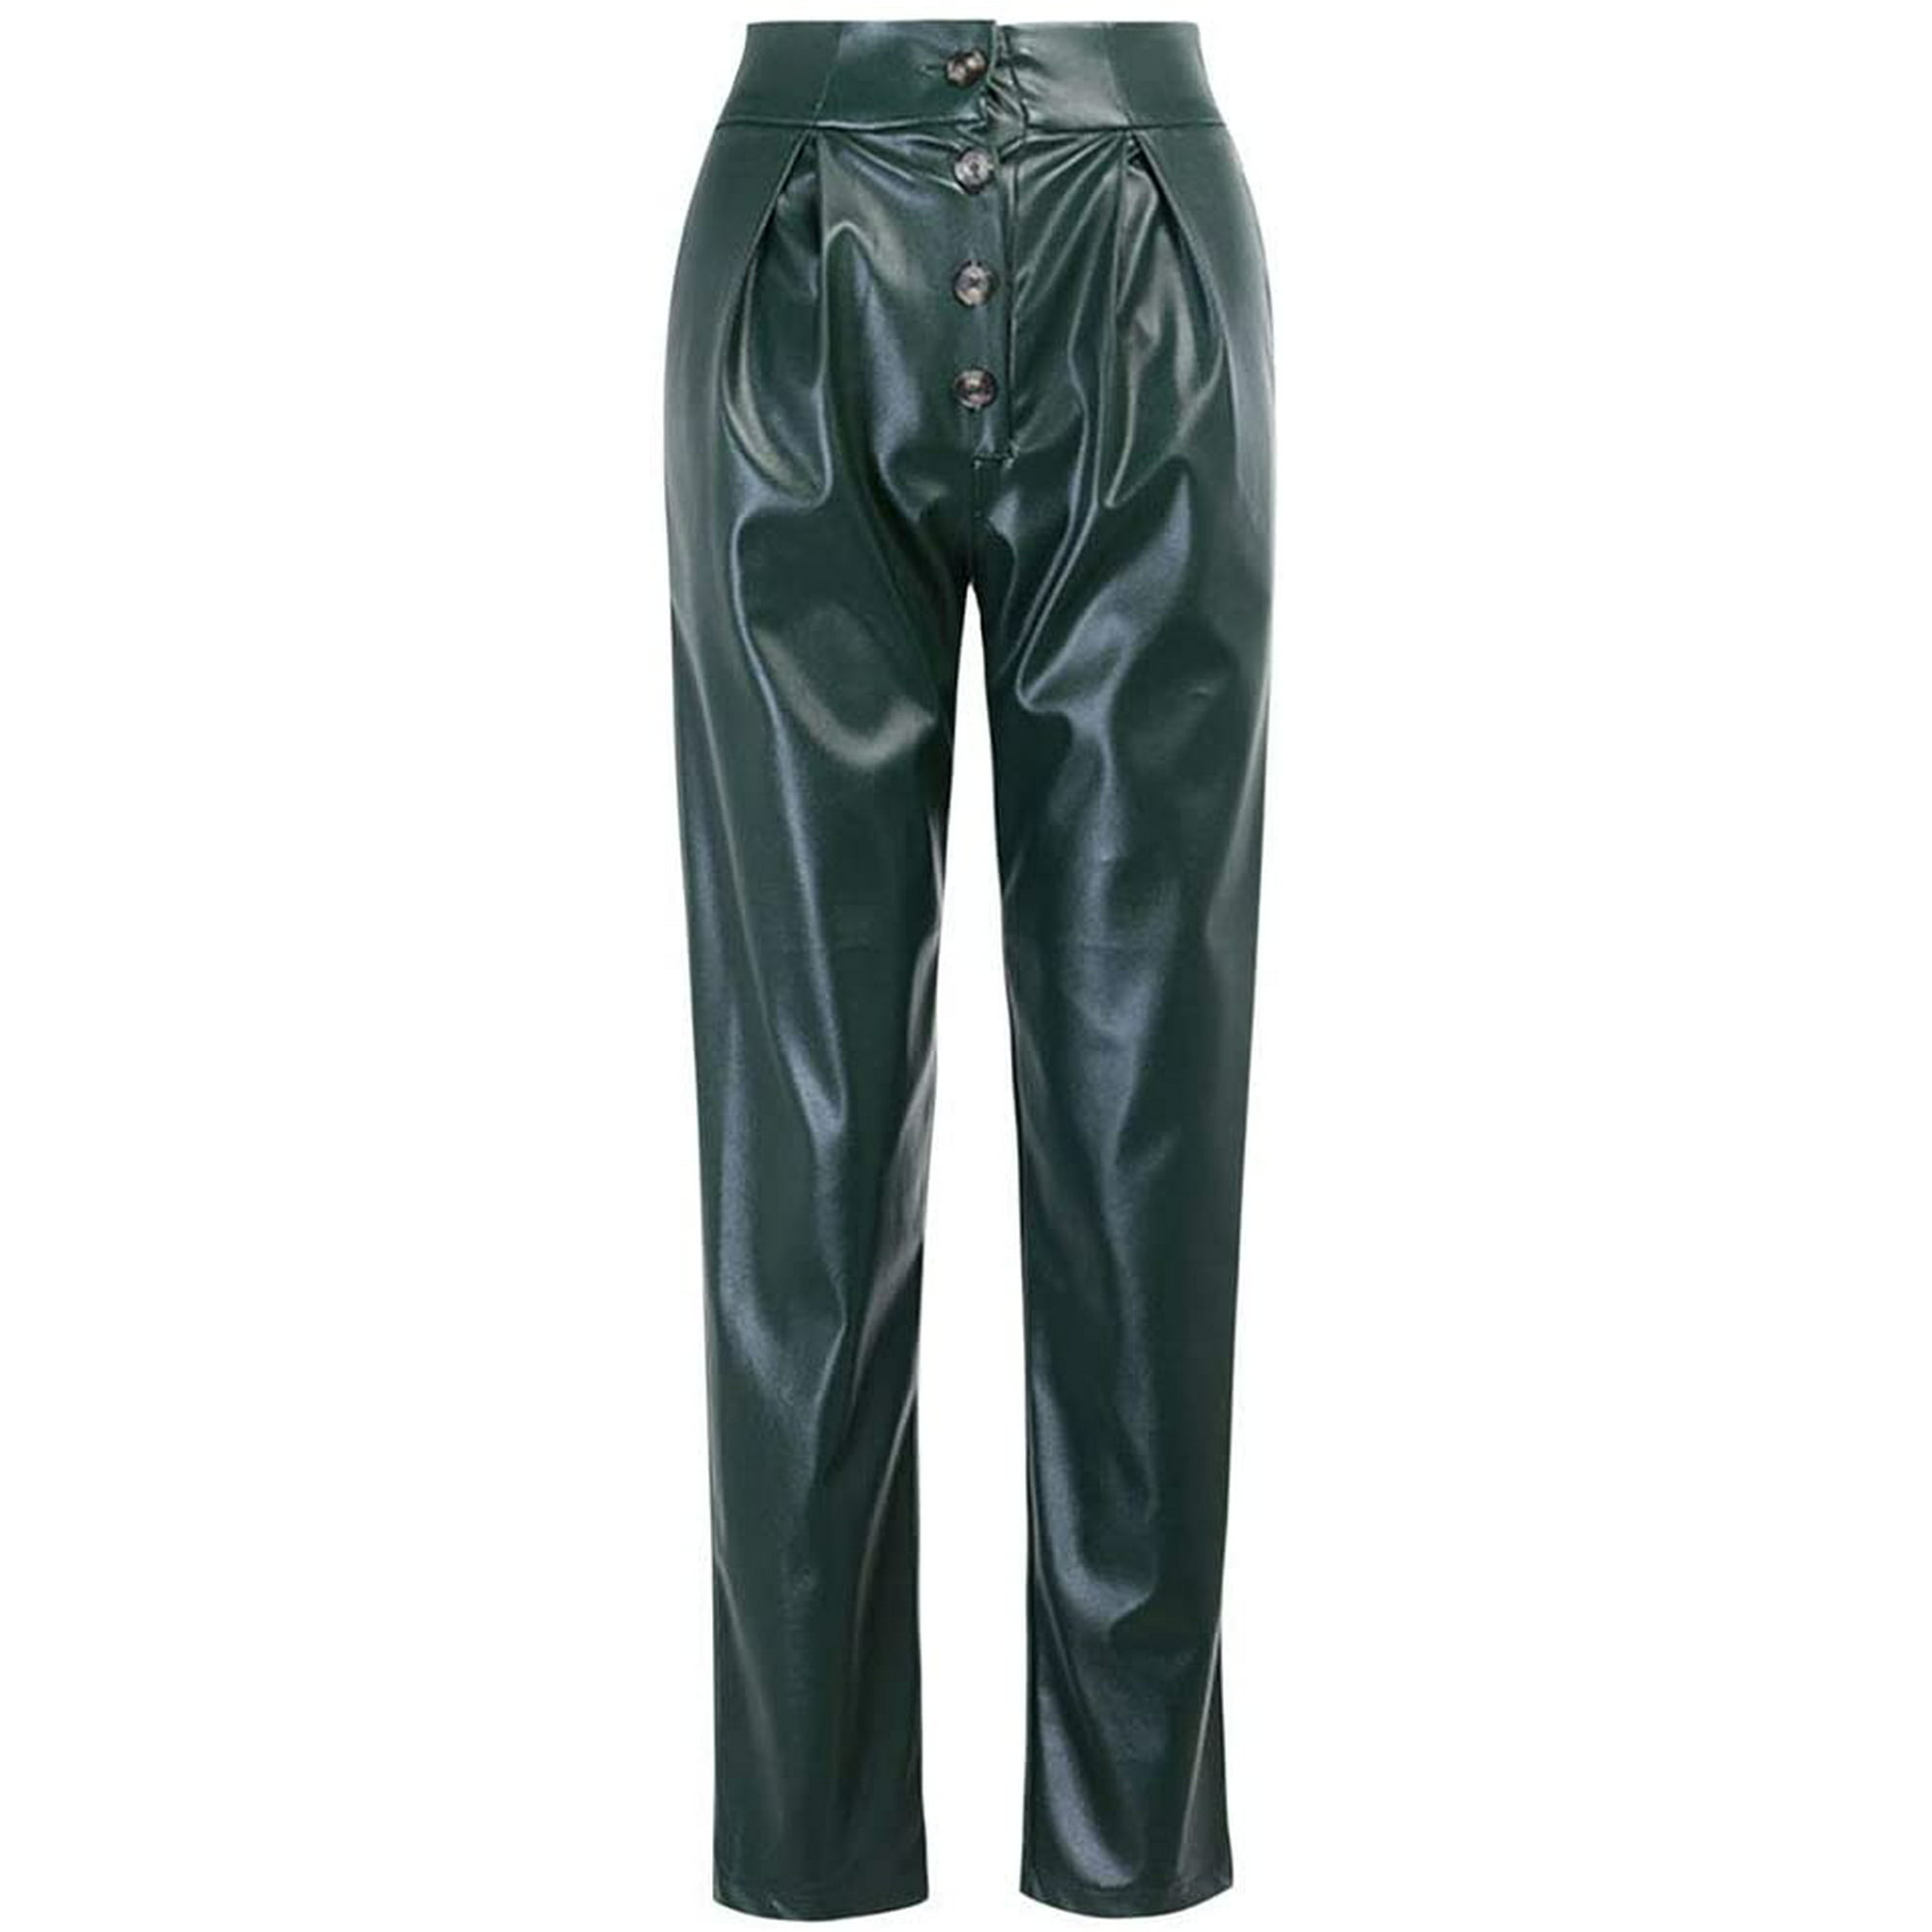 Vintage,Women PU Leather Pants Straight High Waist Pockets Button Closure  Solid Color Street Nightclub Trousers Autumn